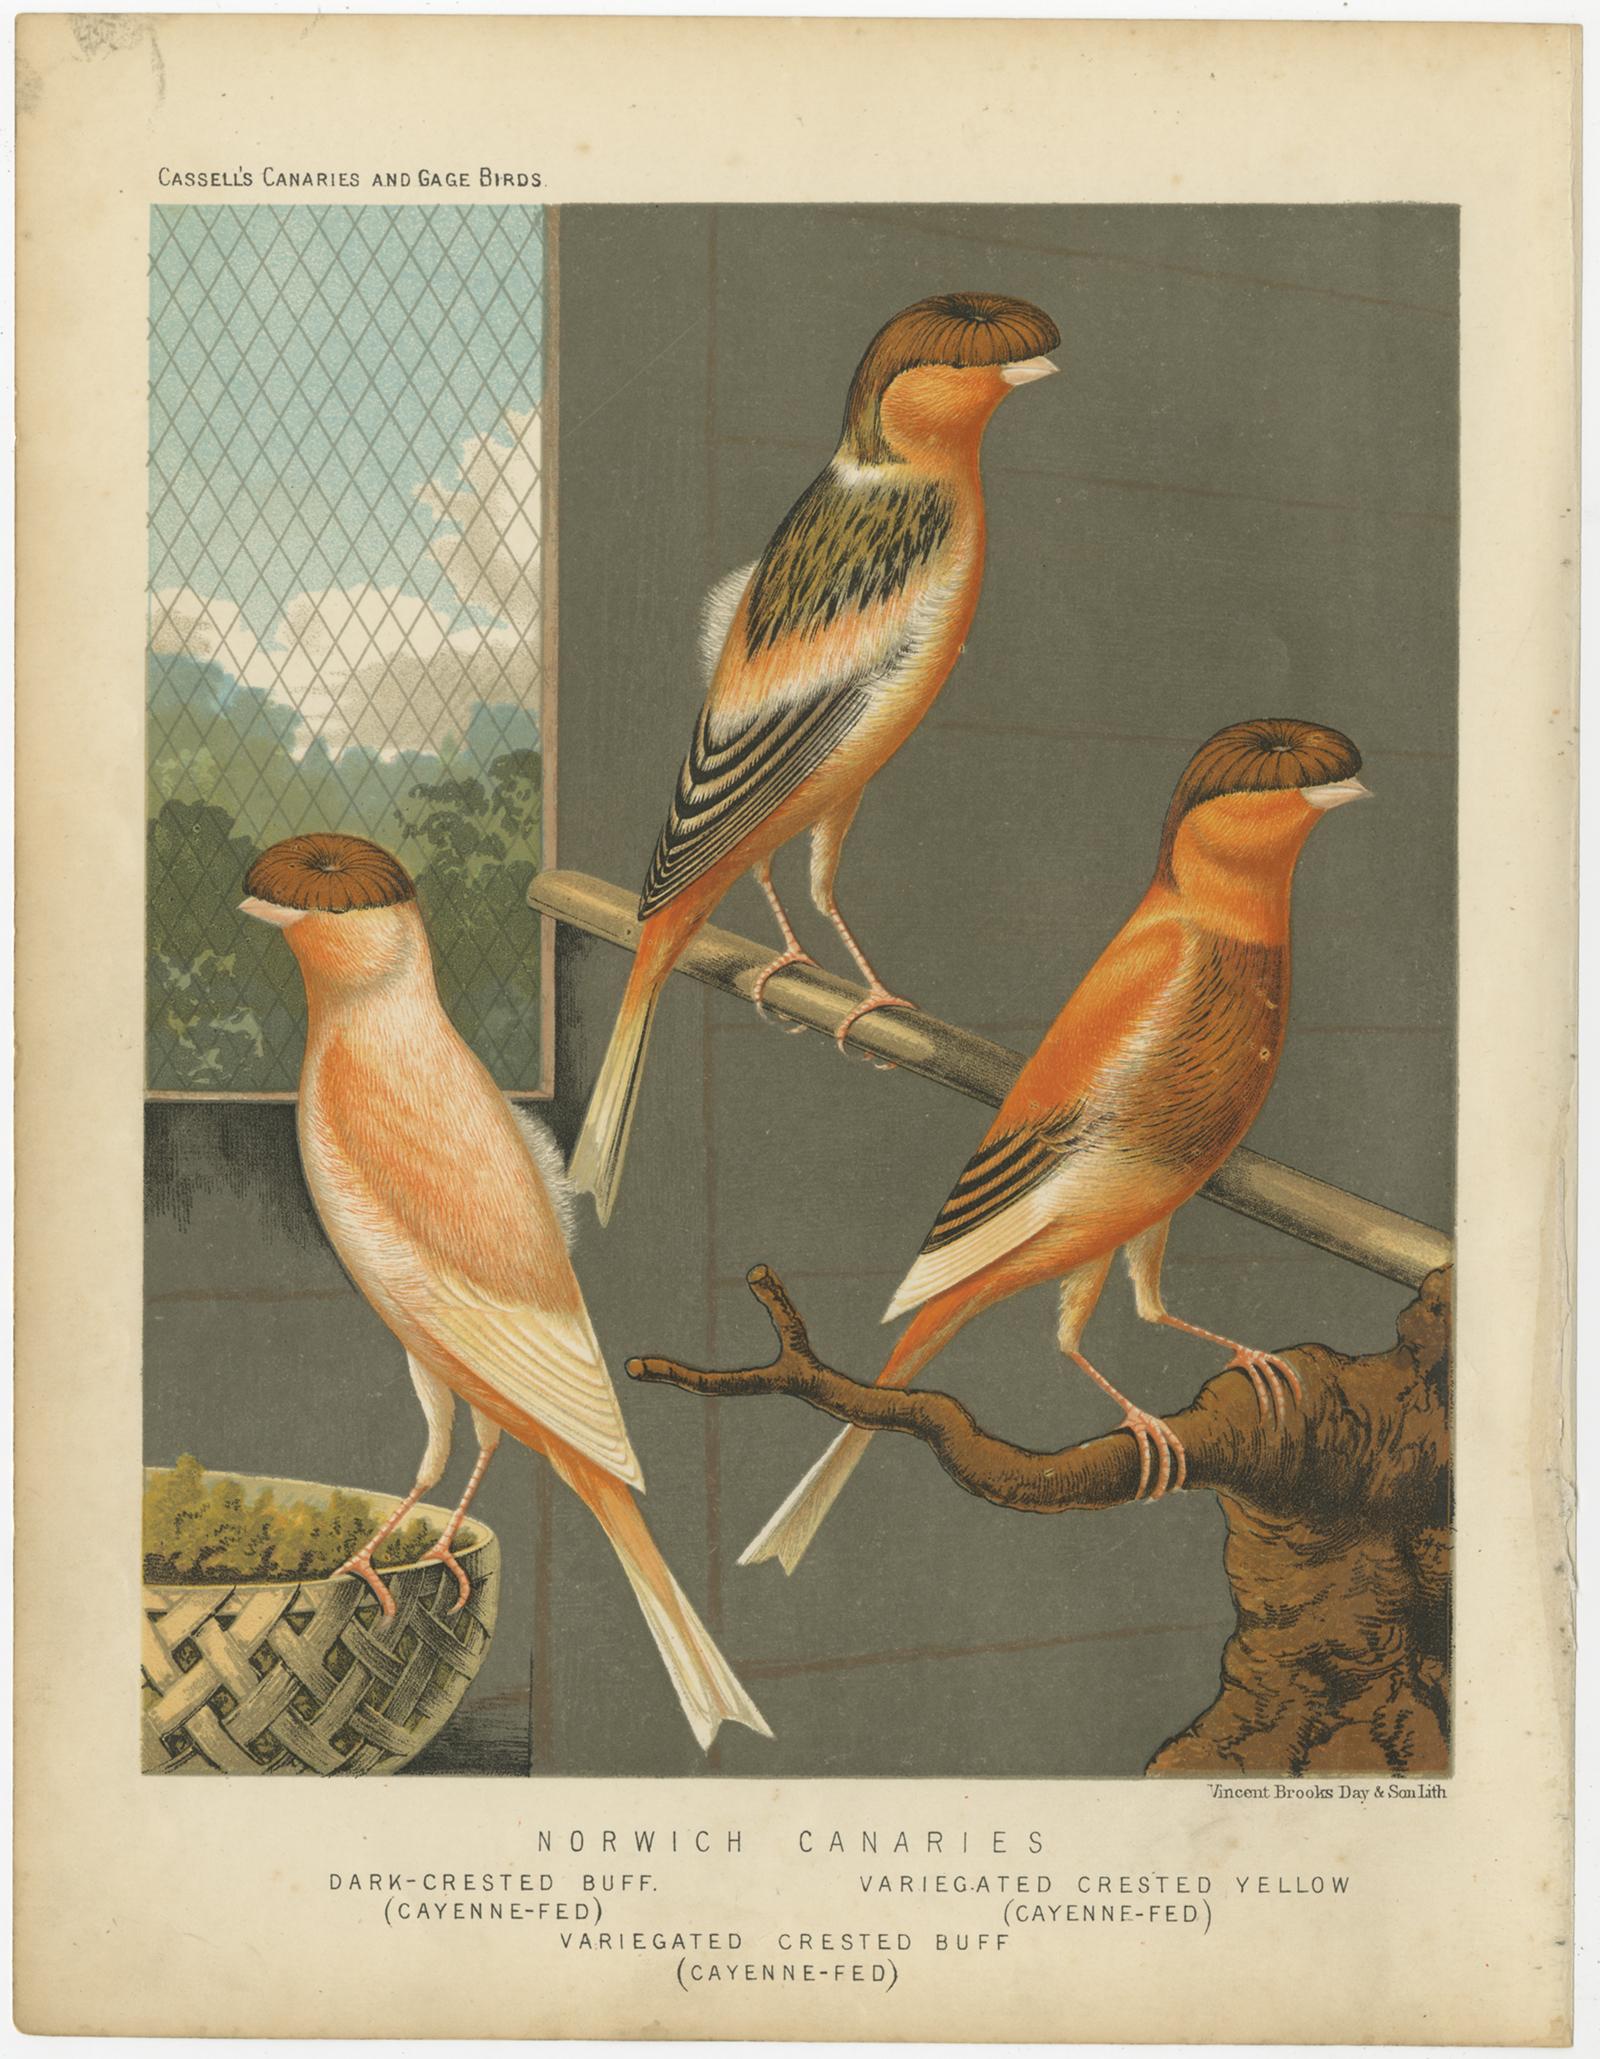 Antique bird print titled 'Norwich Canaries 1. Dark-Crested Buff (Cayenne-Fed) 2. Variegated Crested Buff (Cayenne-Fed) 3. Variegated Crested Yellow (Cayenne-Fed)' Old bird print depicting the Norwich Canaries: Dark-Crested Buff, Variegated Crested